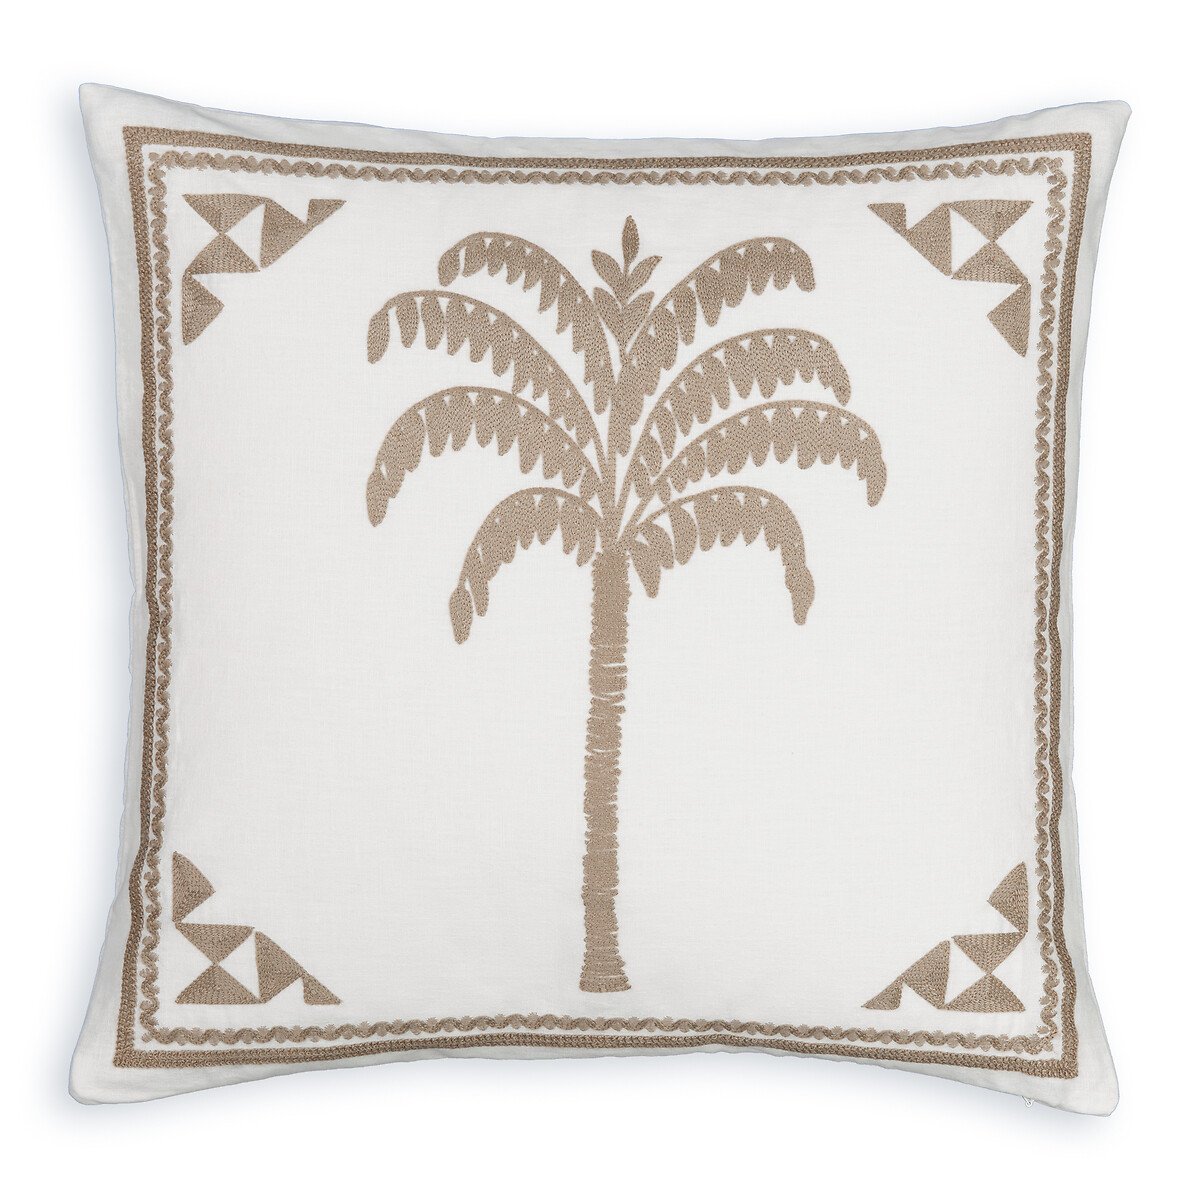 Siwa 45 x 45cm Embroidered Linen & Cotton Cushion Cover